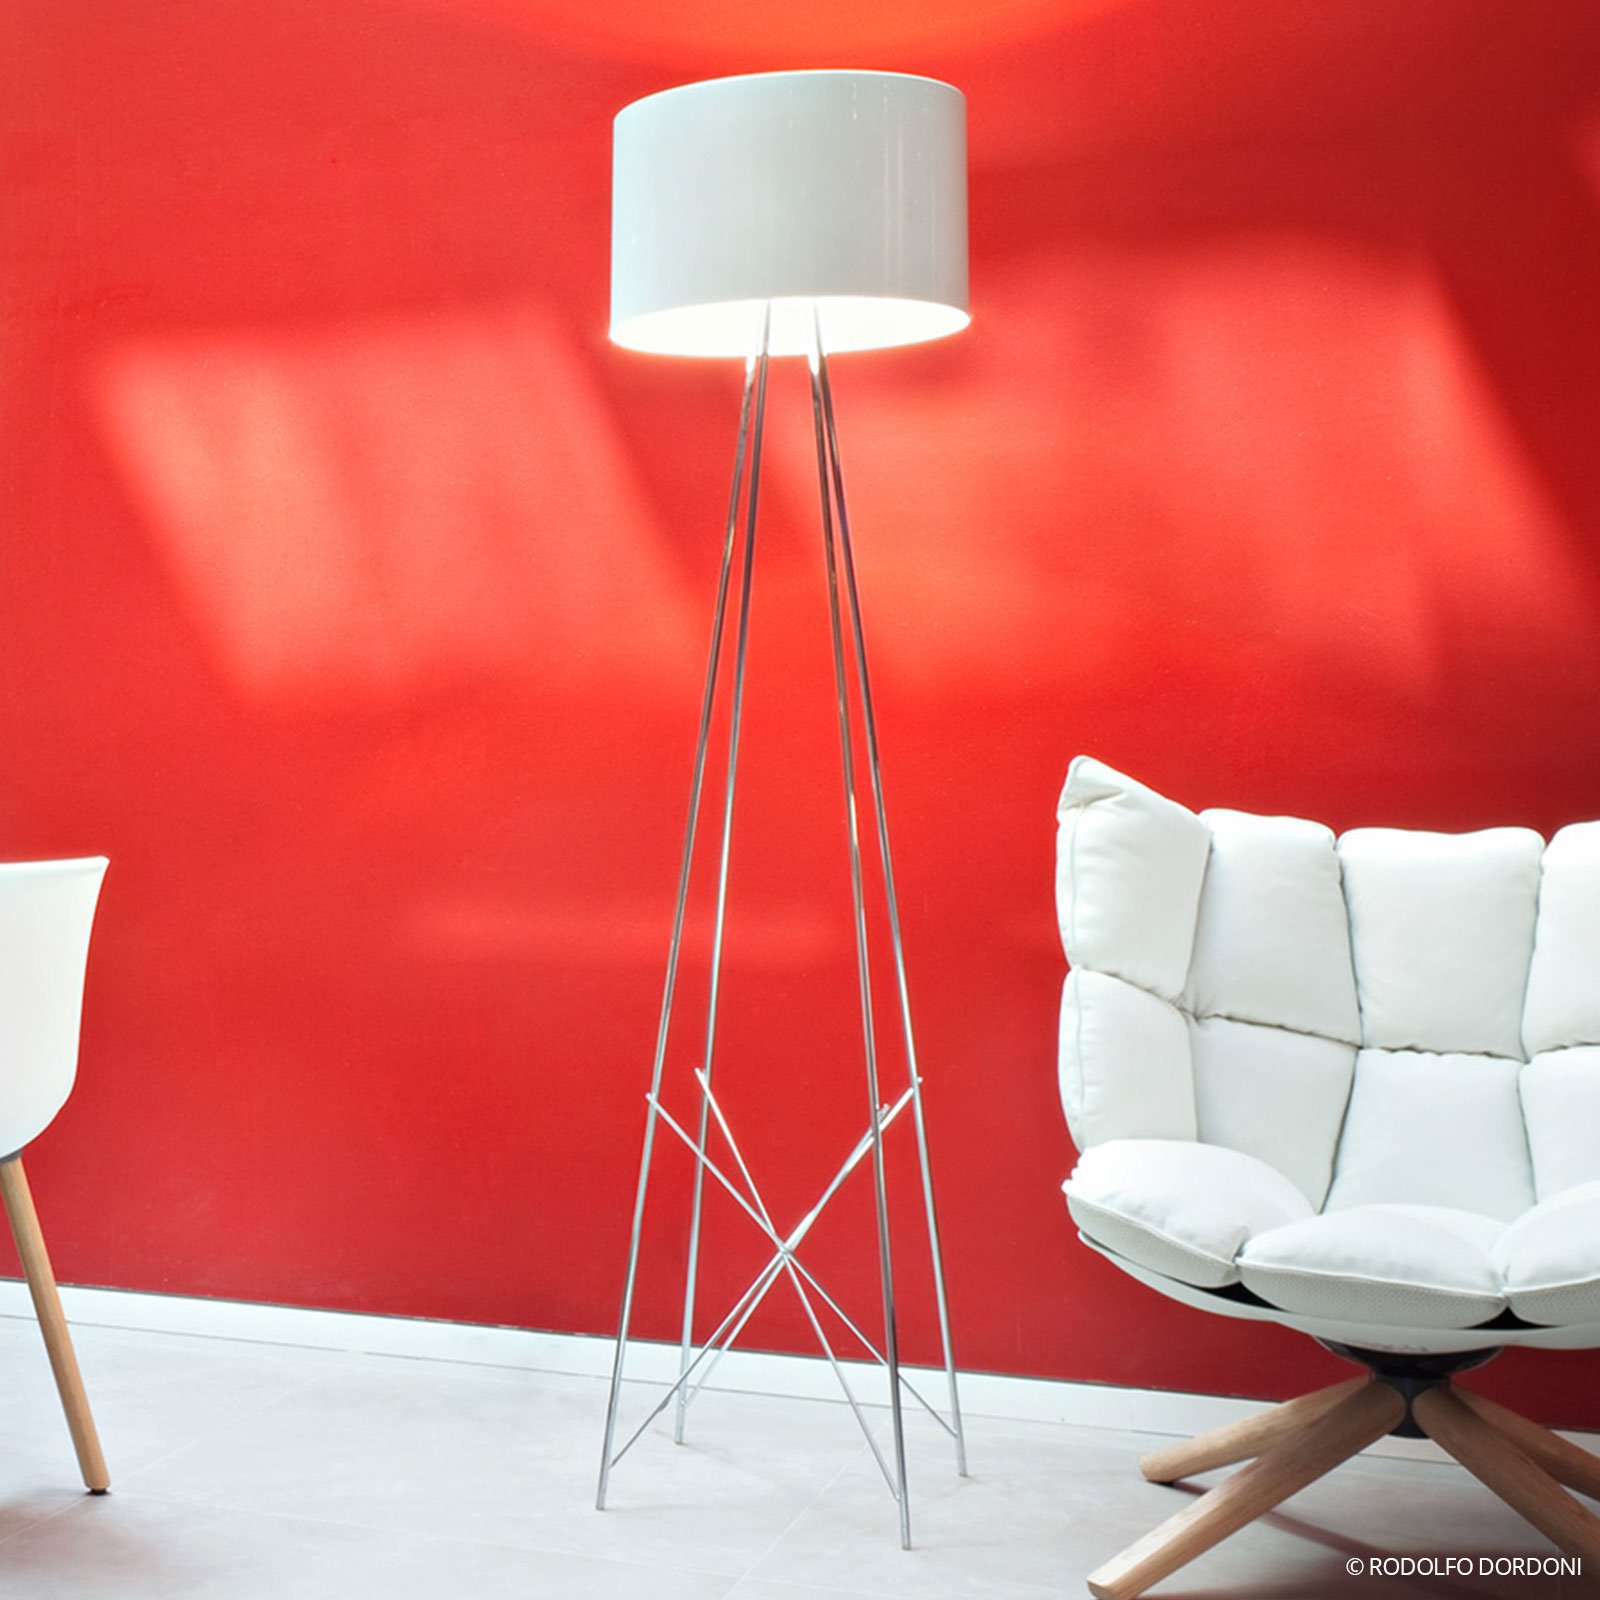 RAY F1 - Floor lamp by FLOS, White